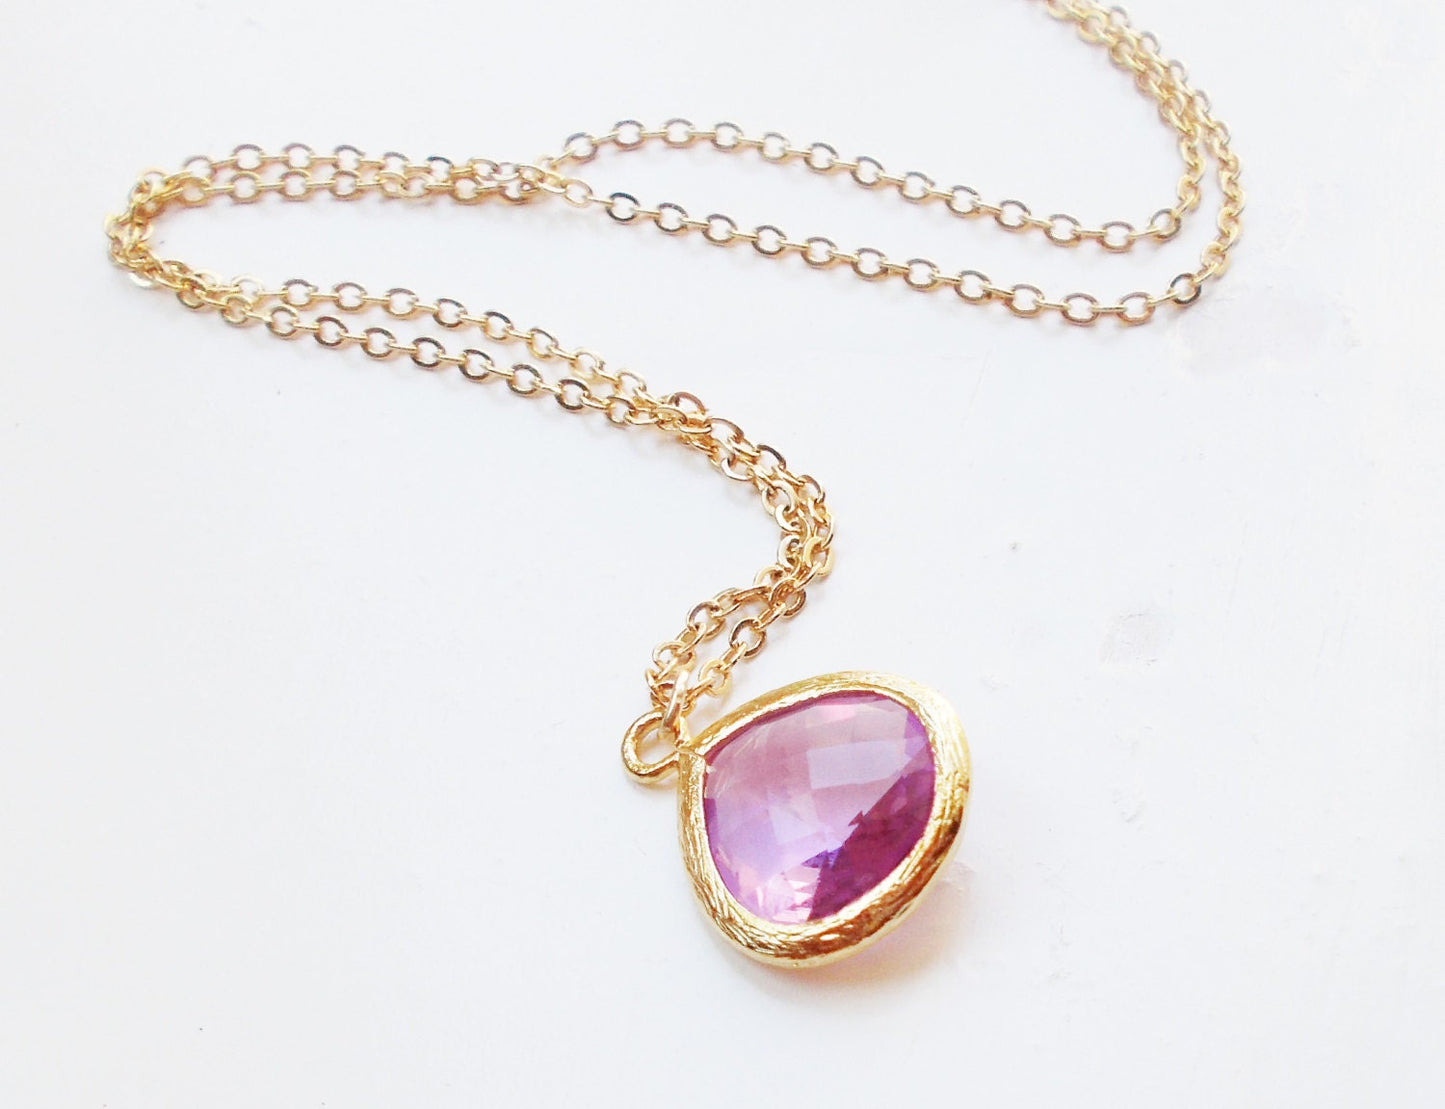 Lavender Teardrop Necklace - Simple Gold Lavender Pendant Necklace - GIFT FOR HER - BridesMaid Gift - Gemstone Necklace